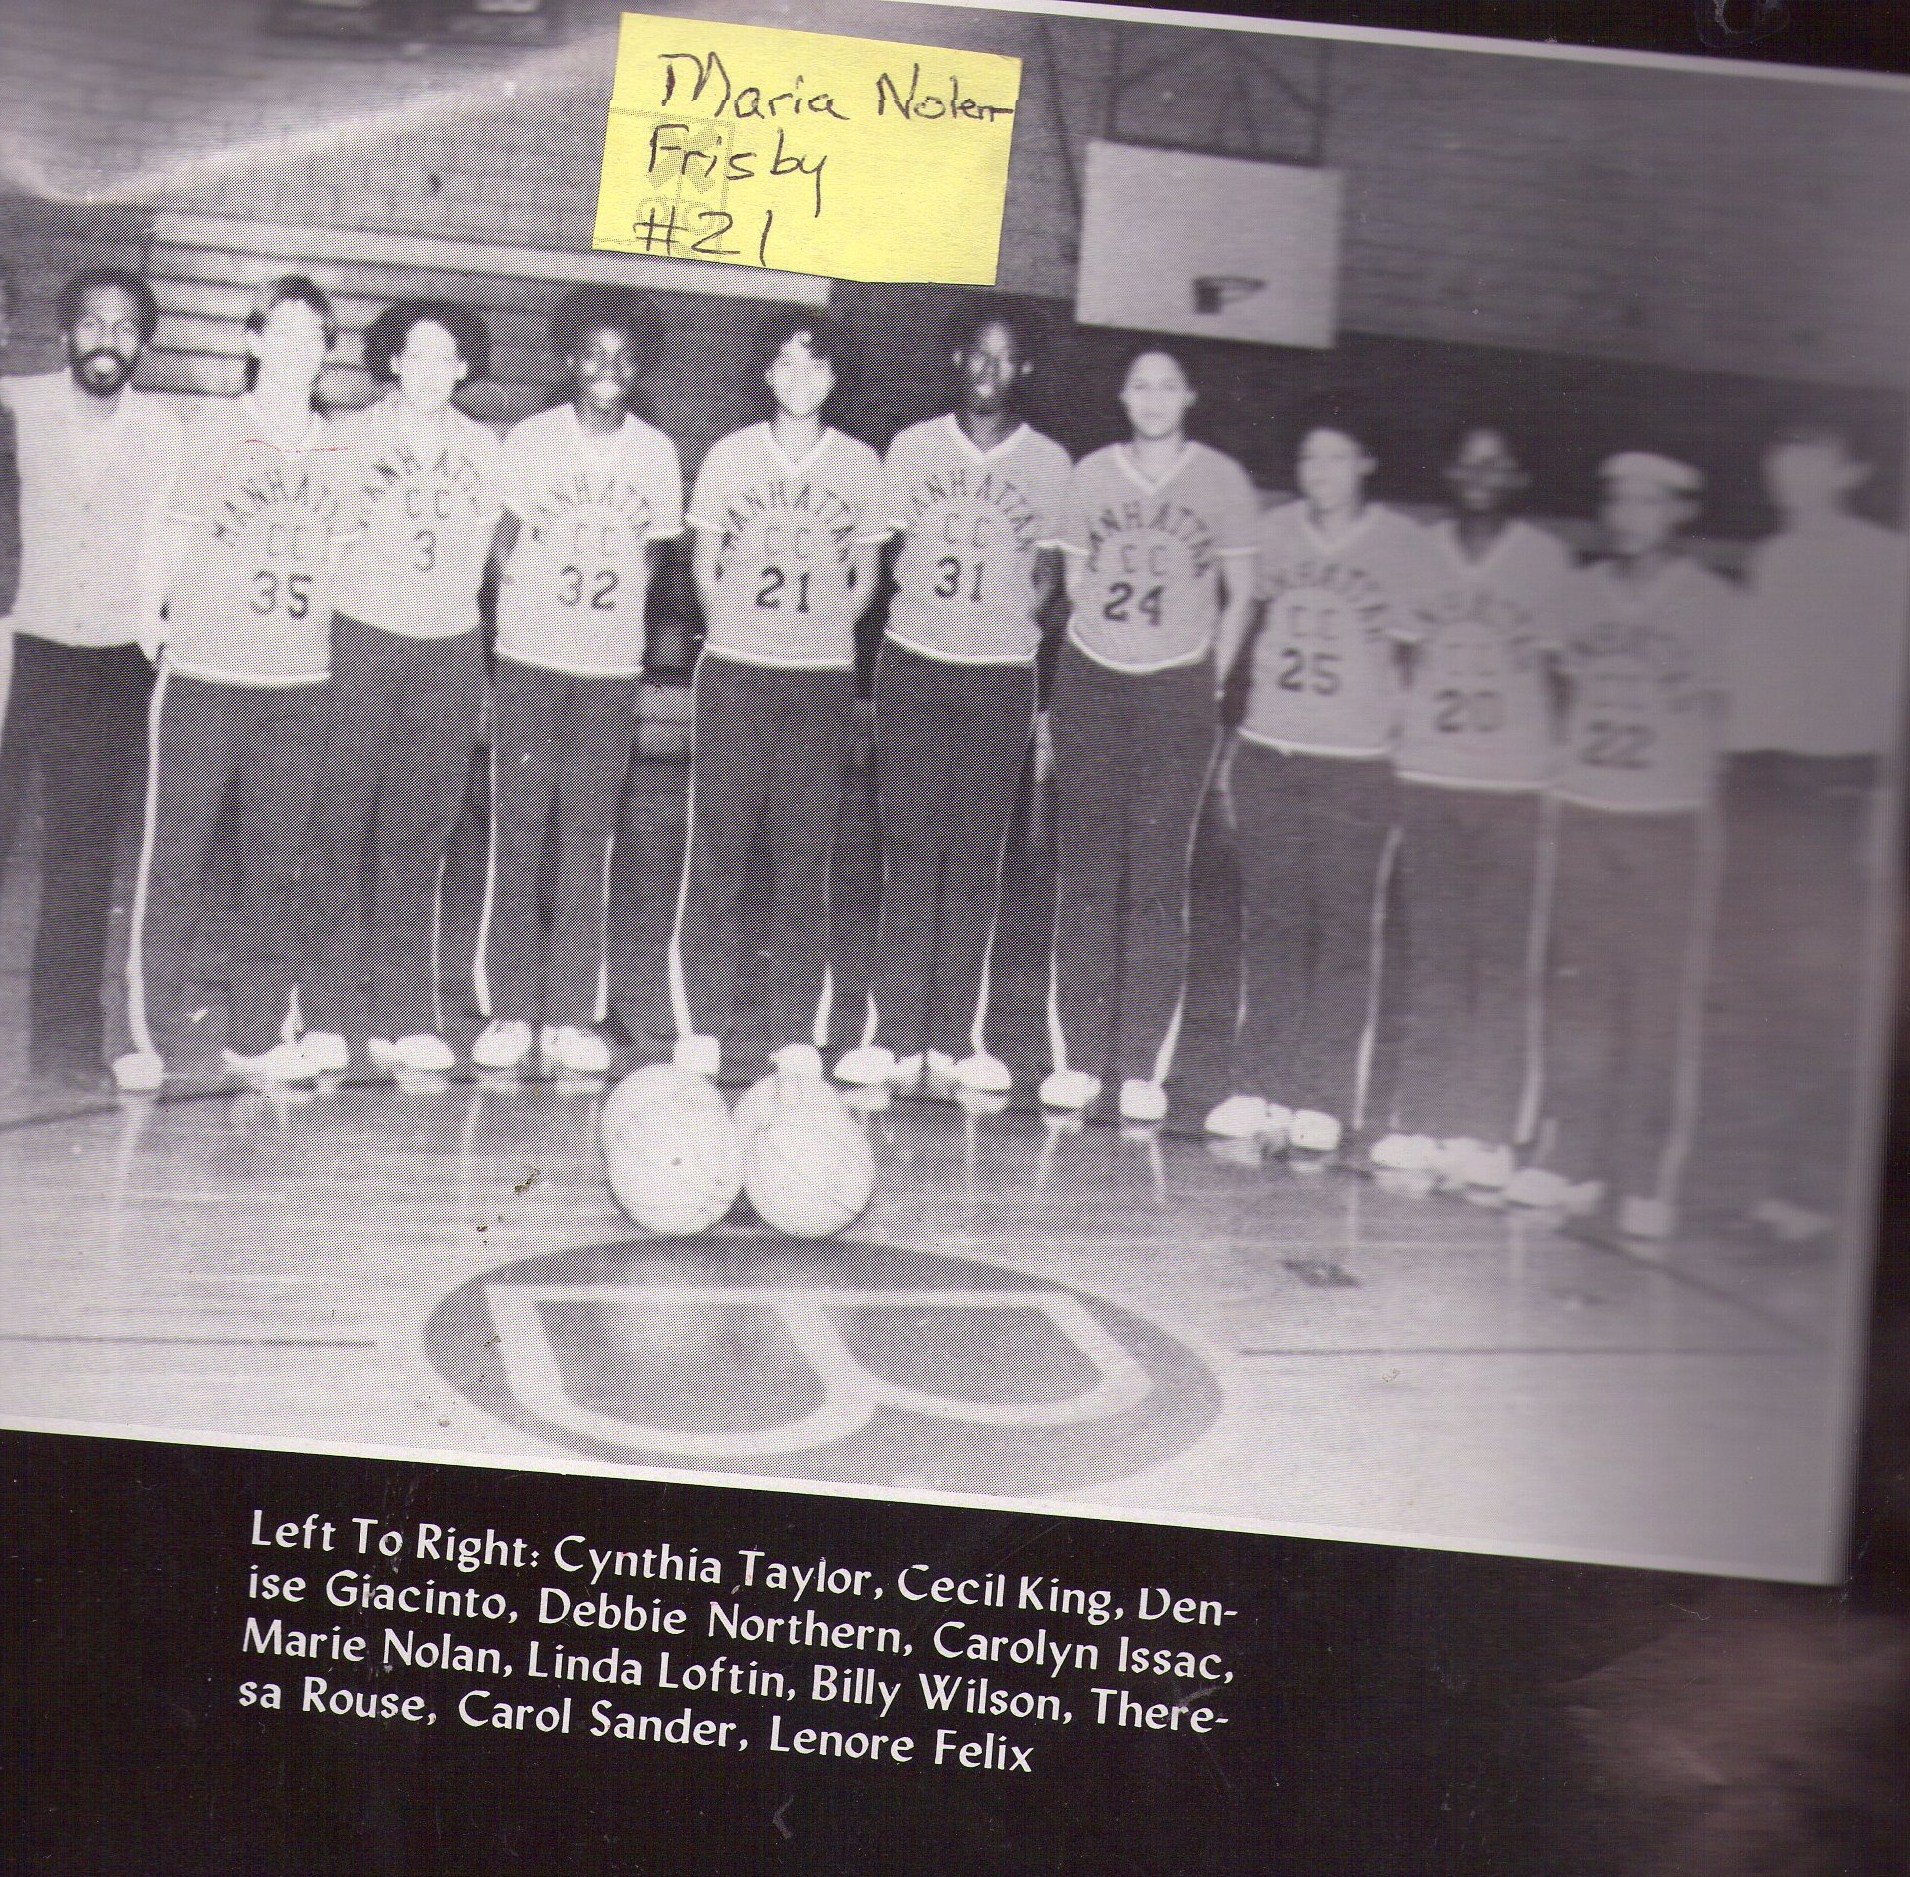 Maria Frisby was a member of the B.M.C.C of the City University of New York Women's Basketball Championship team in 1983. She is #21 in the photograph.